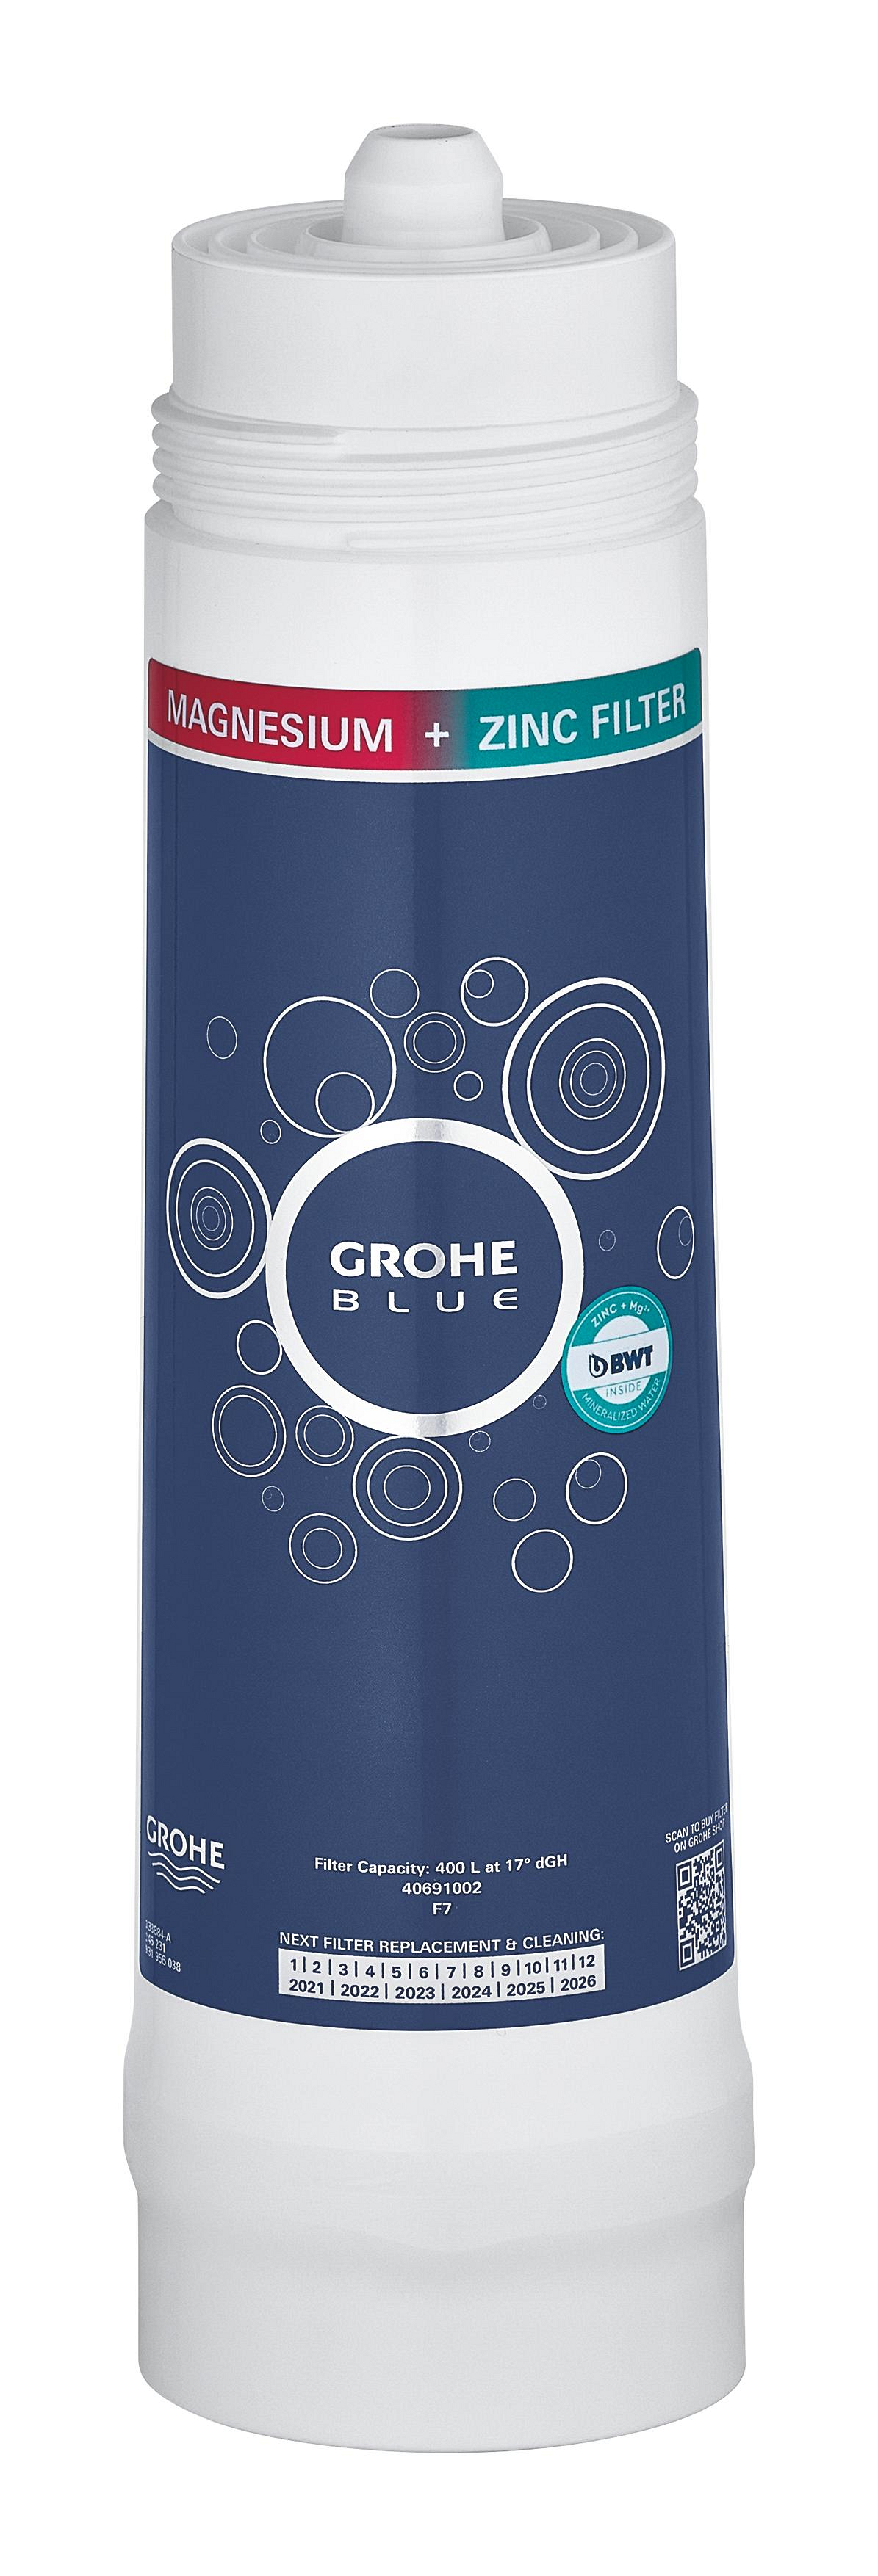 GROHE Blue Magnesium + Zink Filter 400L